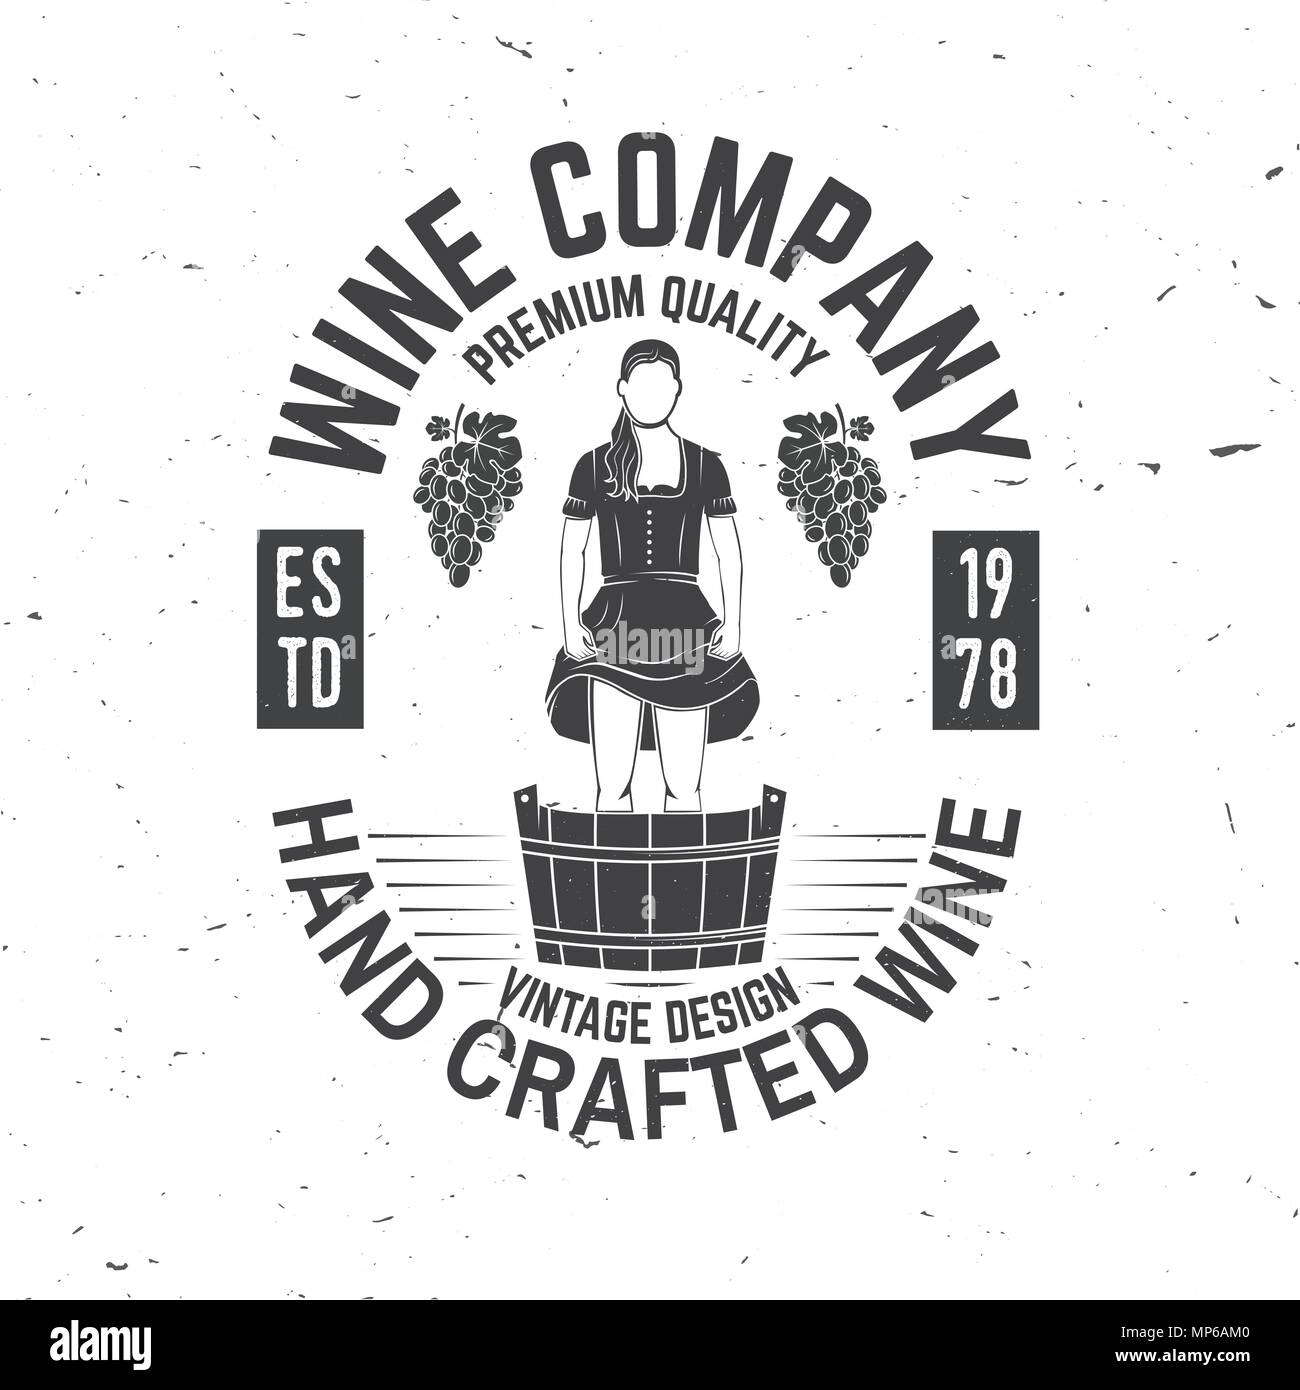 Wine company badge, sign or label. Vector illustration. Vintage design for winery company, bar, pub, shop, branding and restaurant business. Coaster for wine glasses Stock Vector